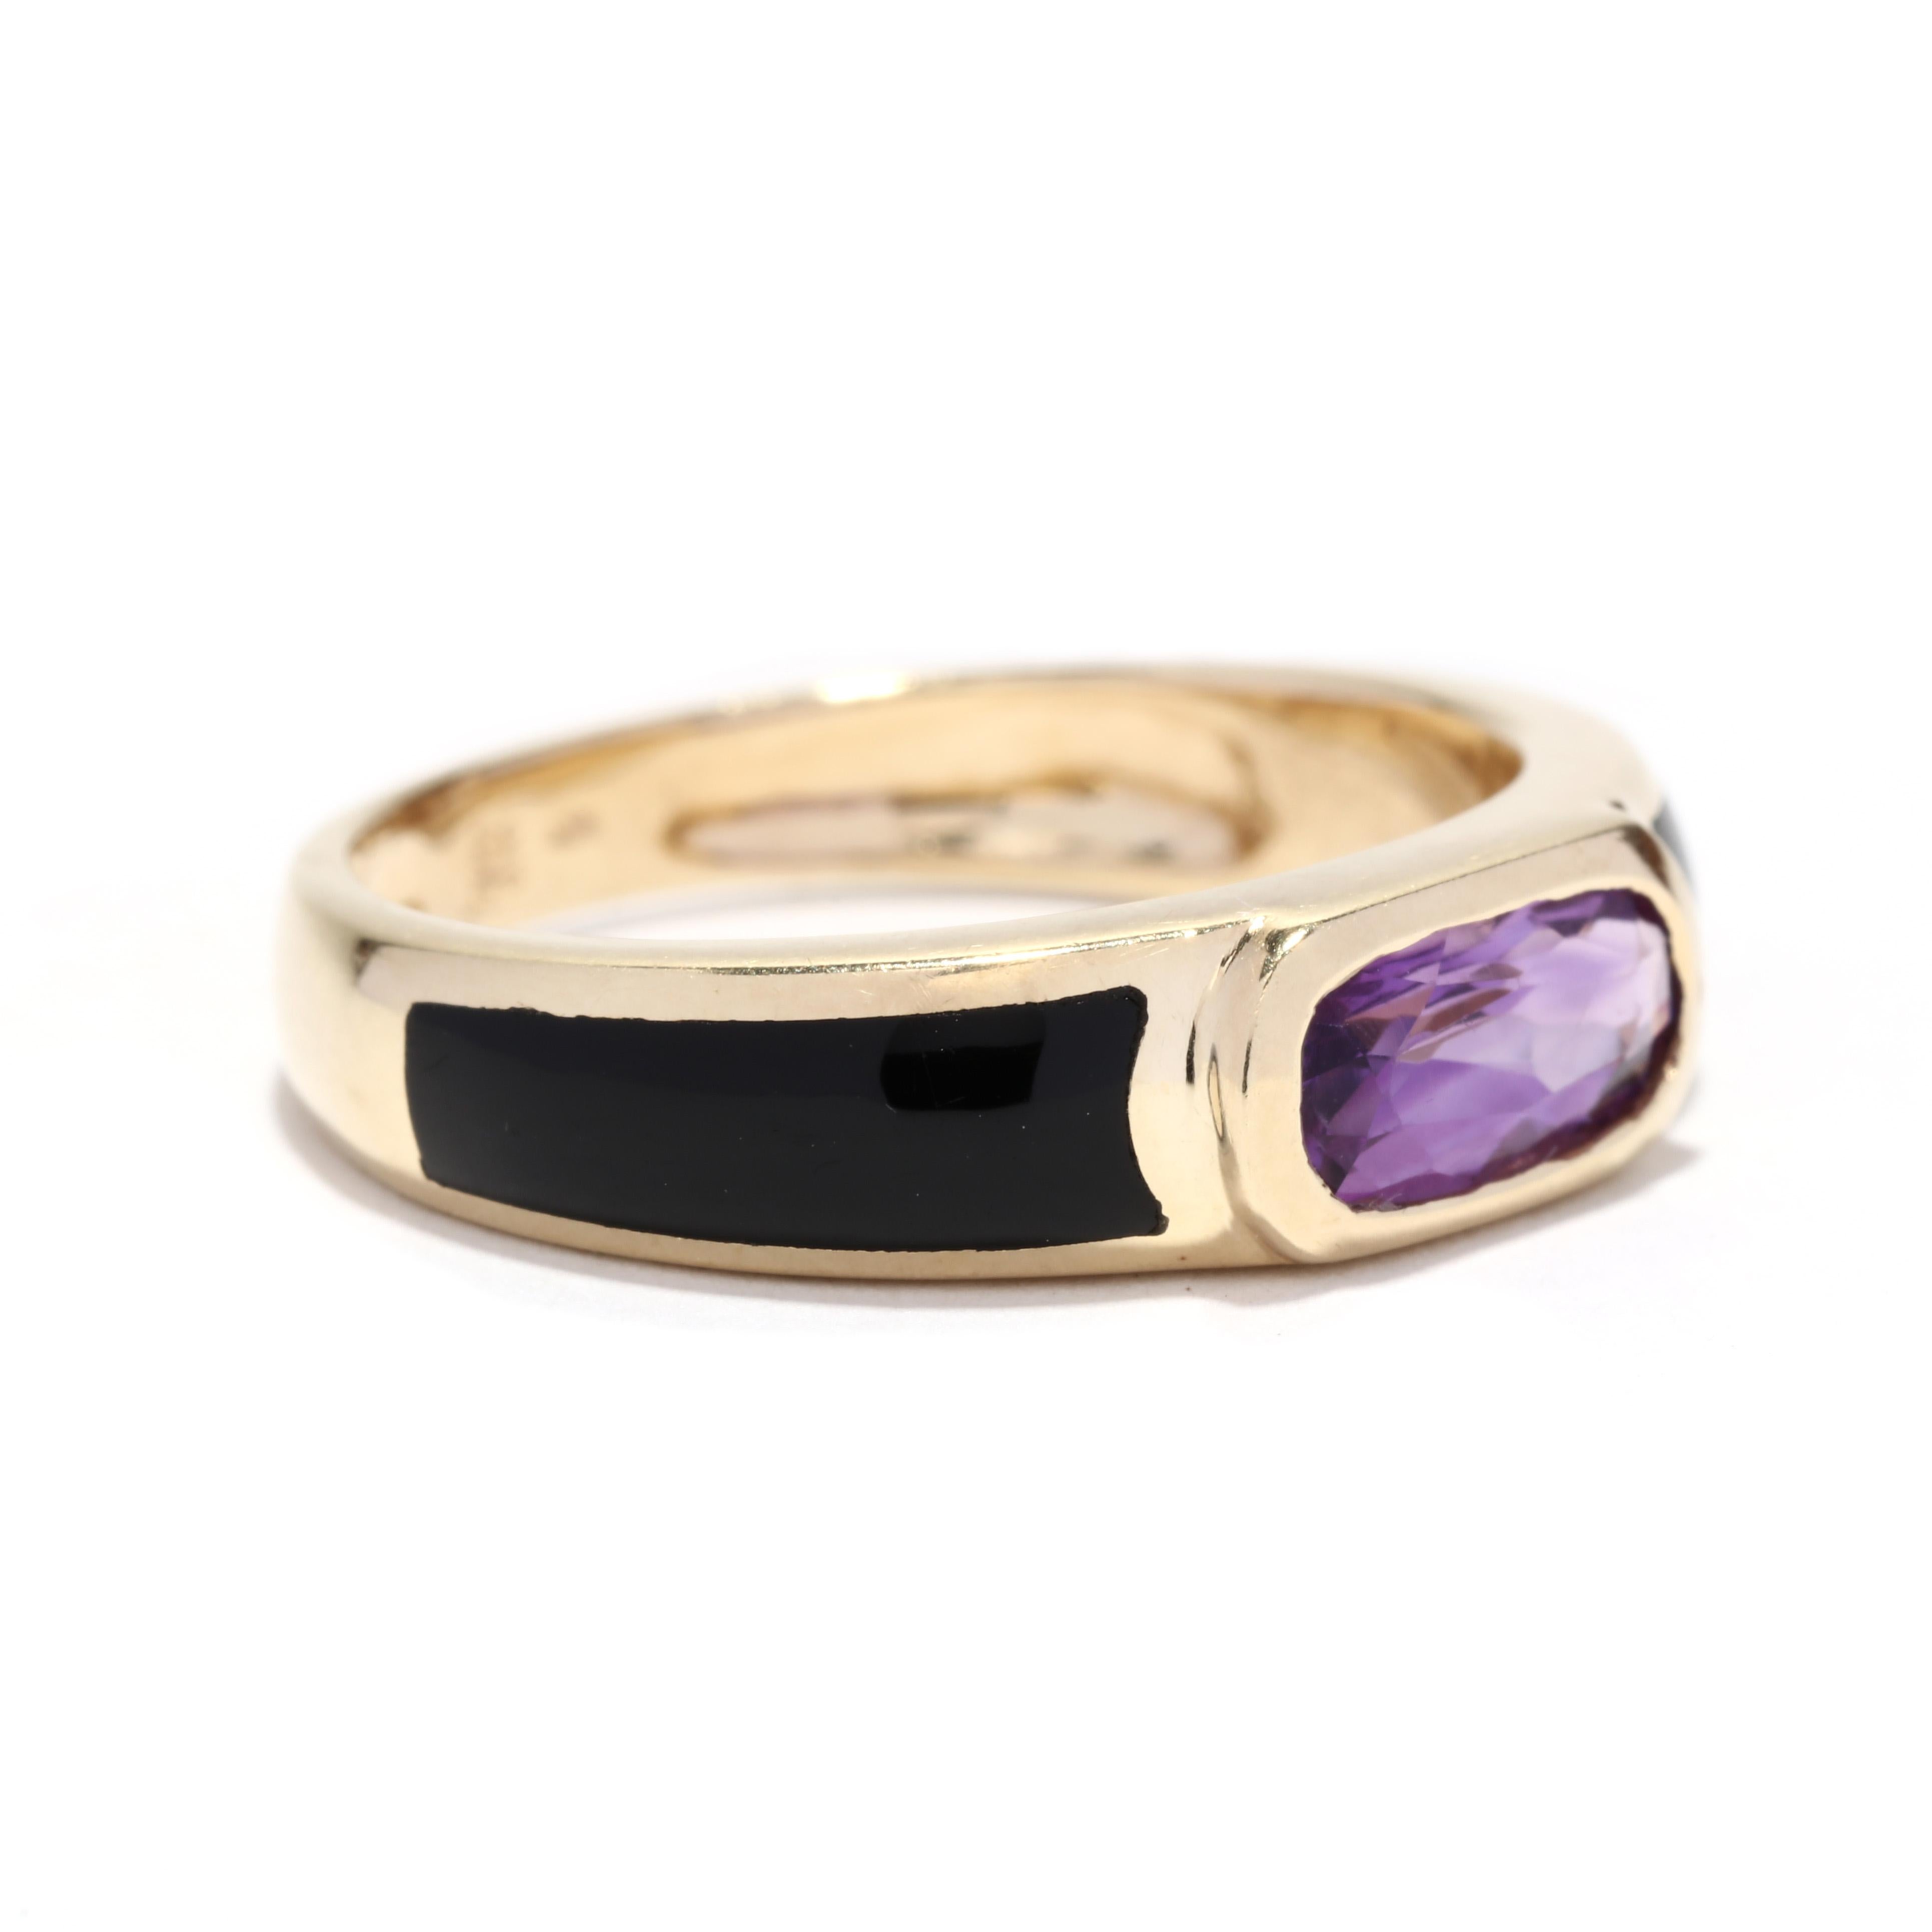 A vintage 14 karat yellow gold amethyst and black onyx ring. This stackable ring features a bezel set, oblong oval cut amethyst weighing approximately .60 carat with a custom cut tapered black onyx stone on either side.

Stones: 
- amethyst, 1